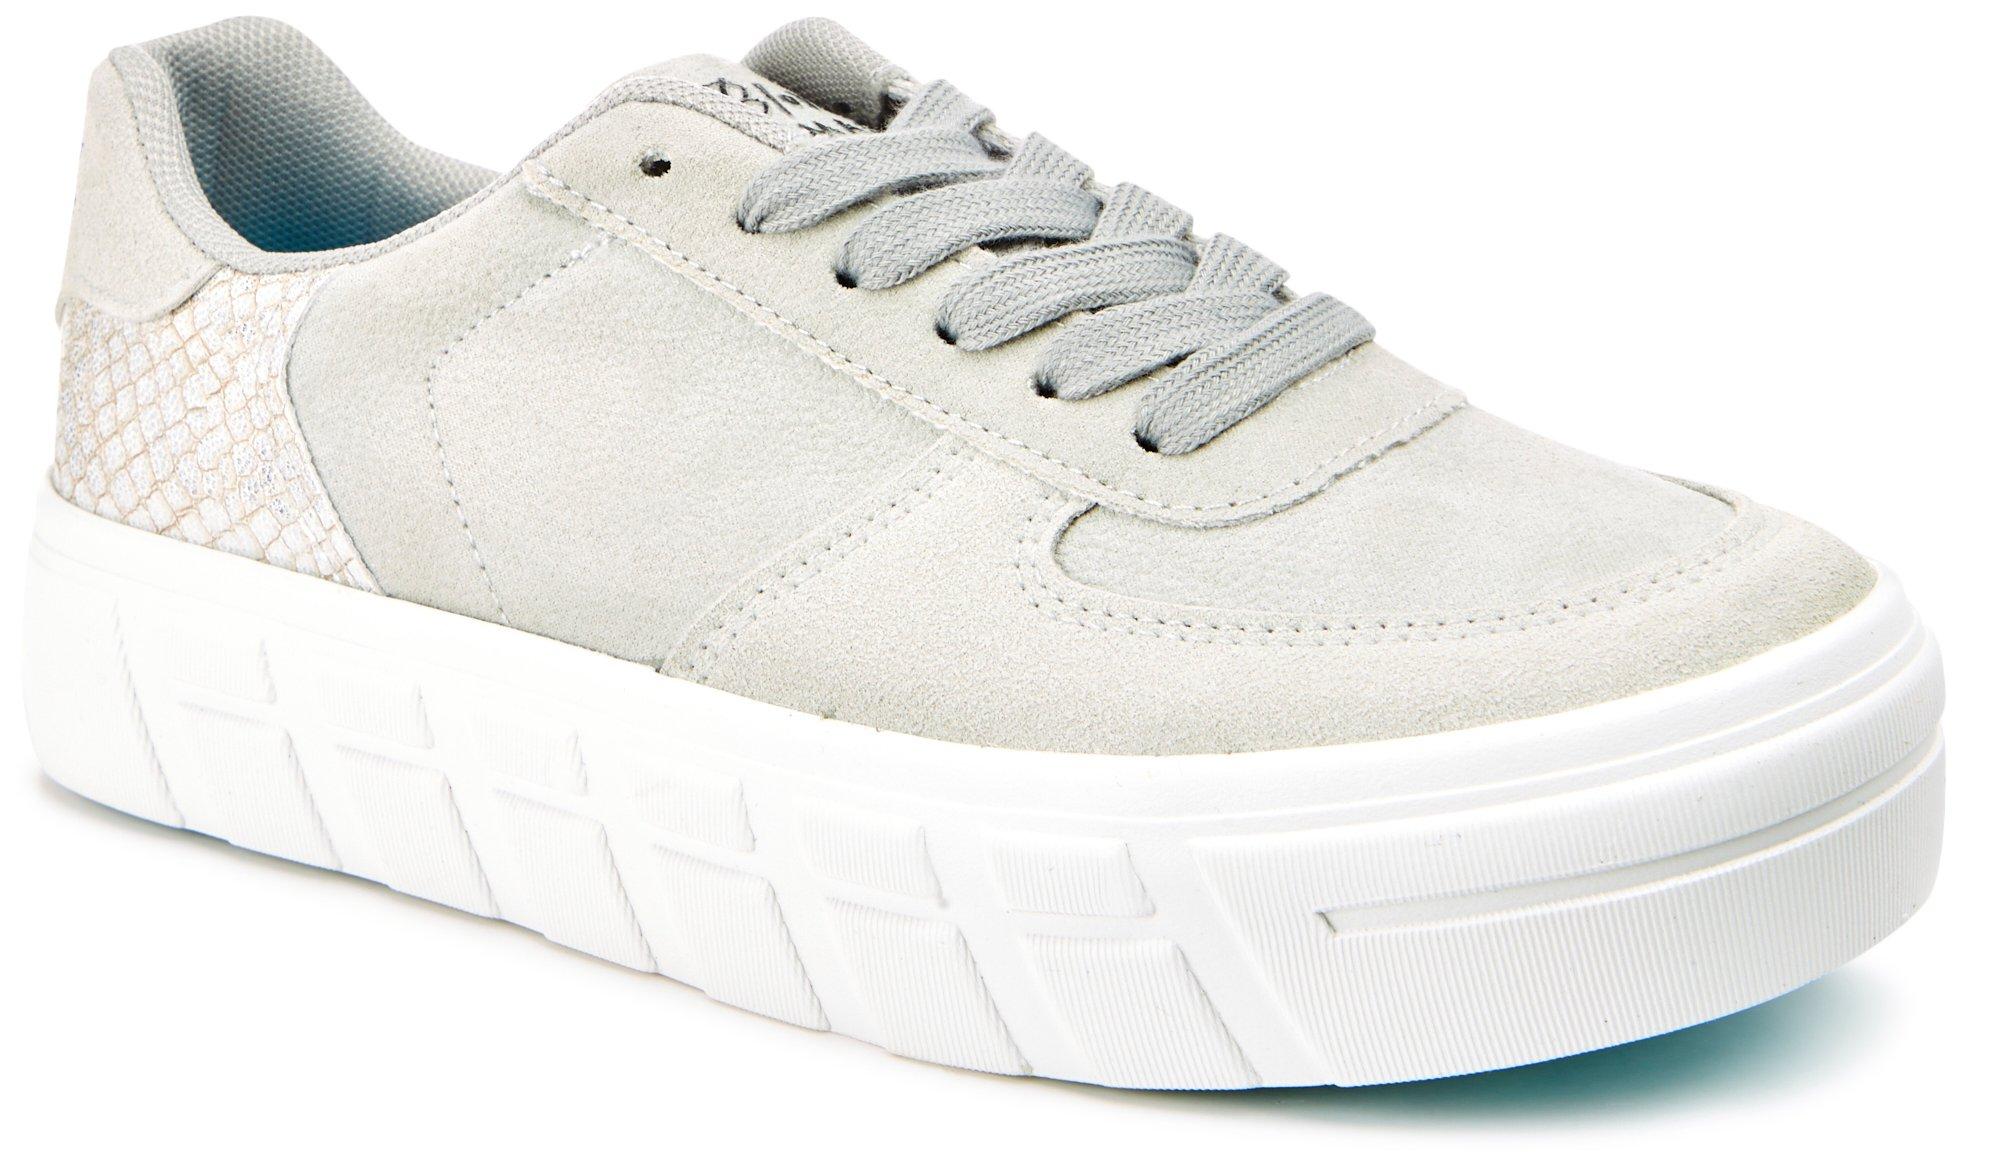 Women's Solid Faux Leather Casual Sneakers